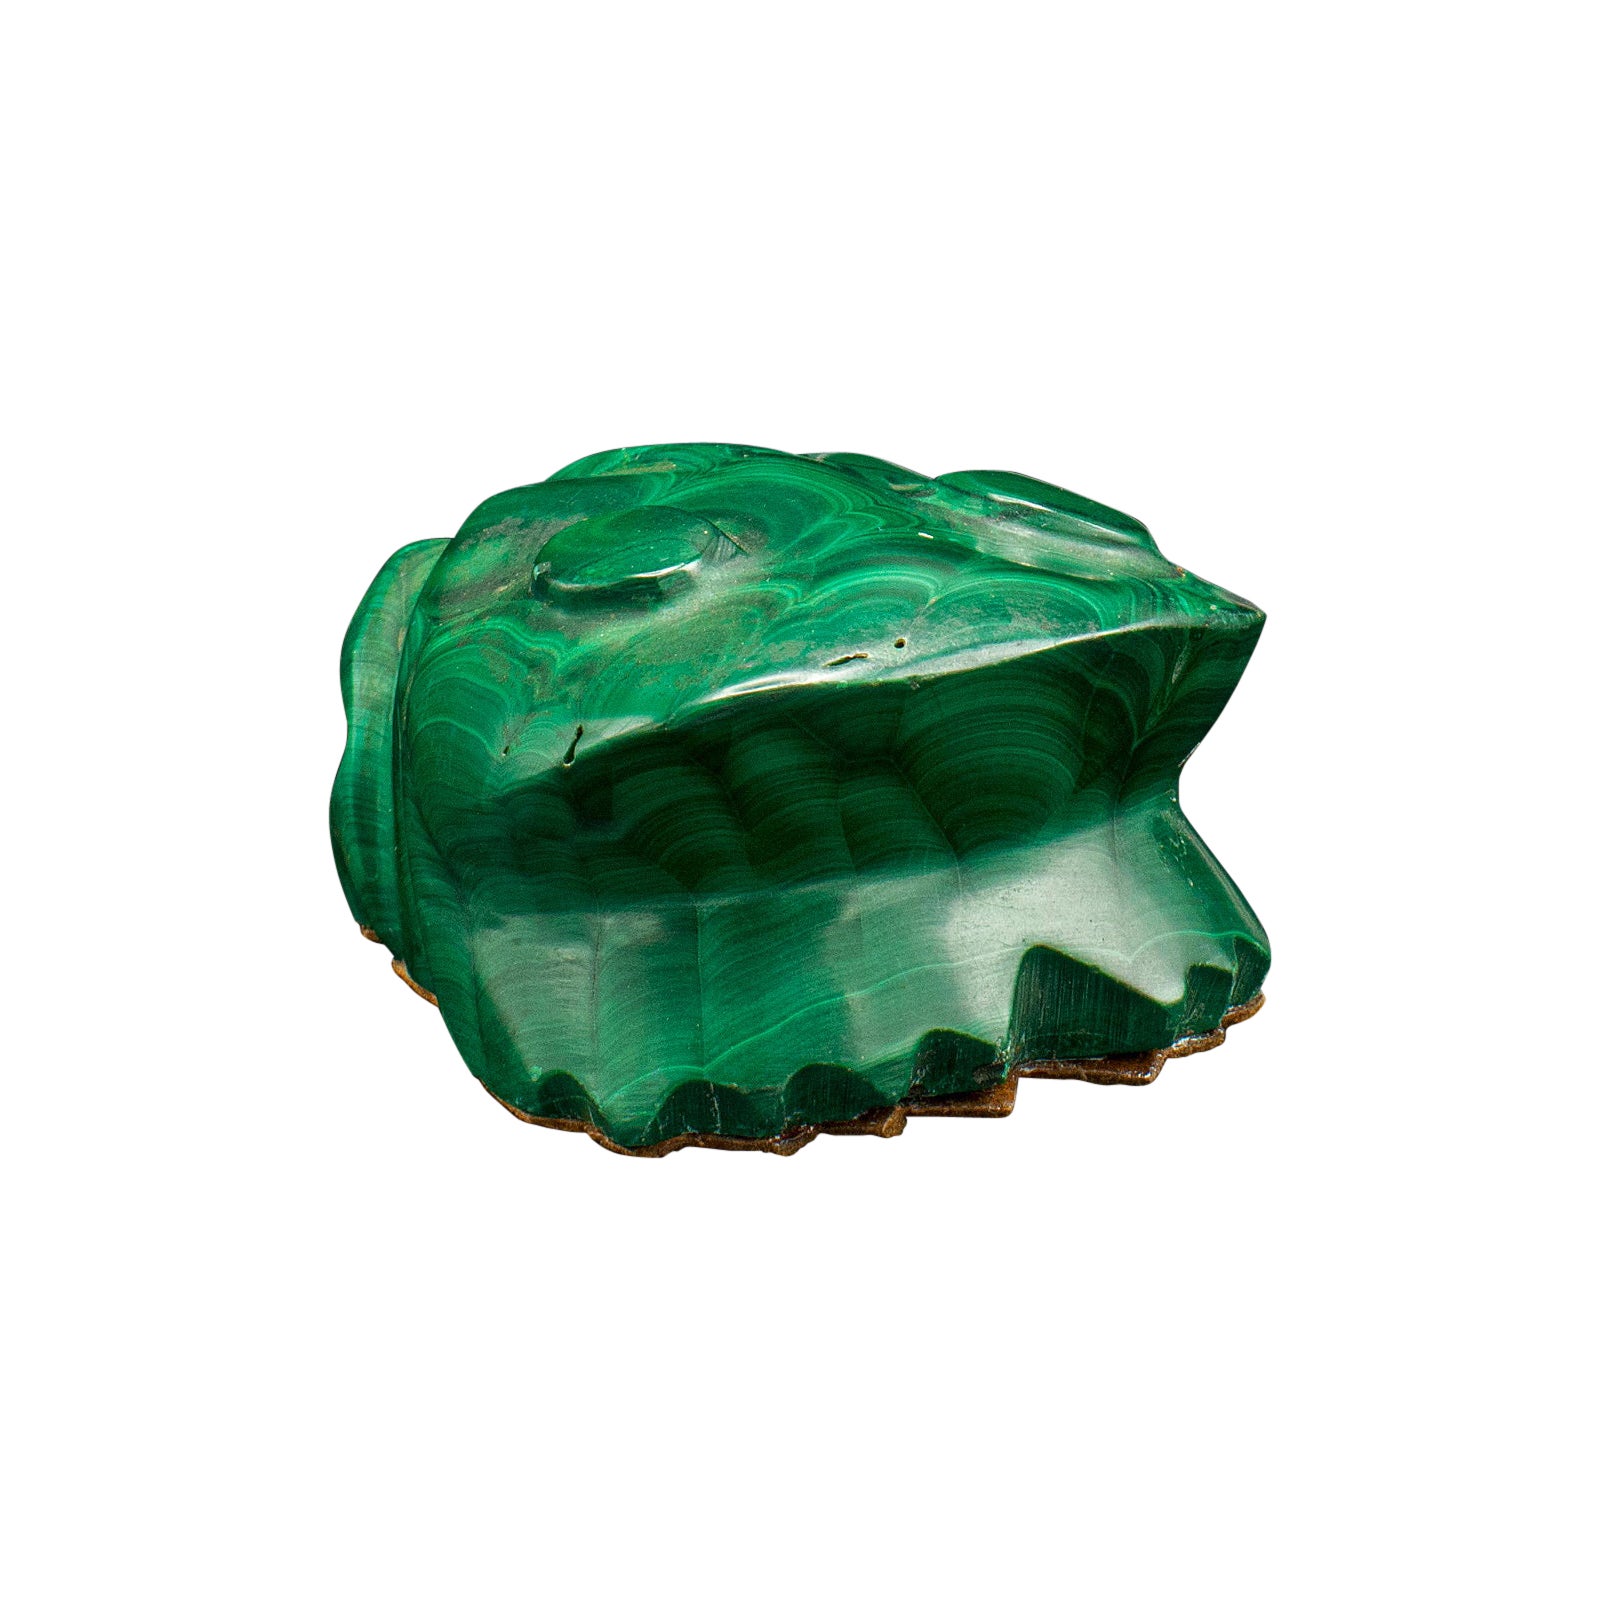 Vintage Ornamental Frog, Chinese, Malachite, Miniature, Late Art Deco, C.1950 For Sale